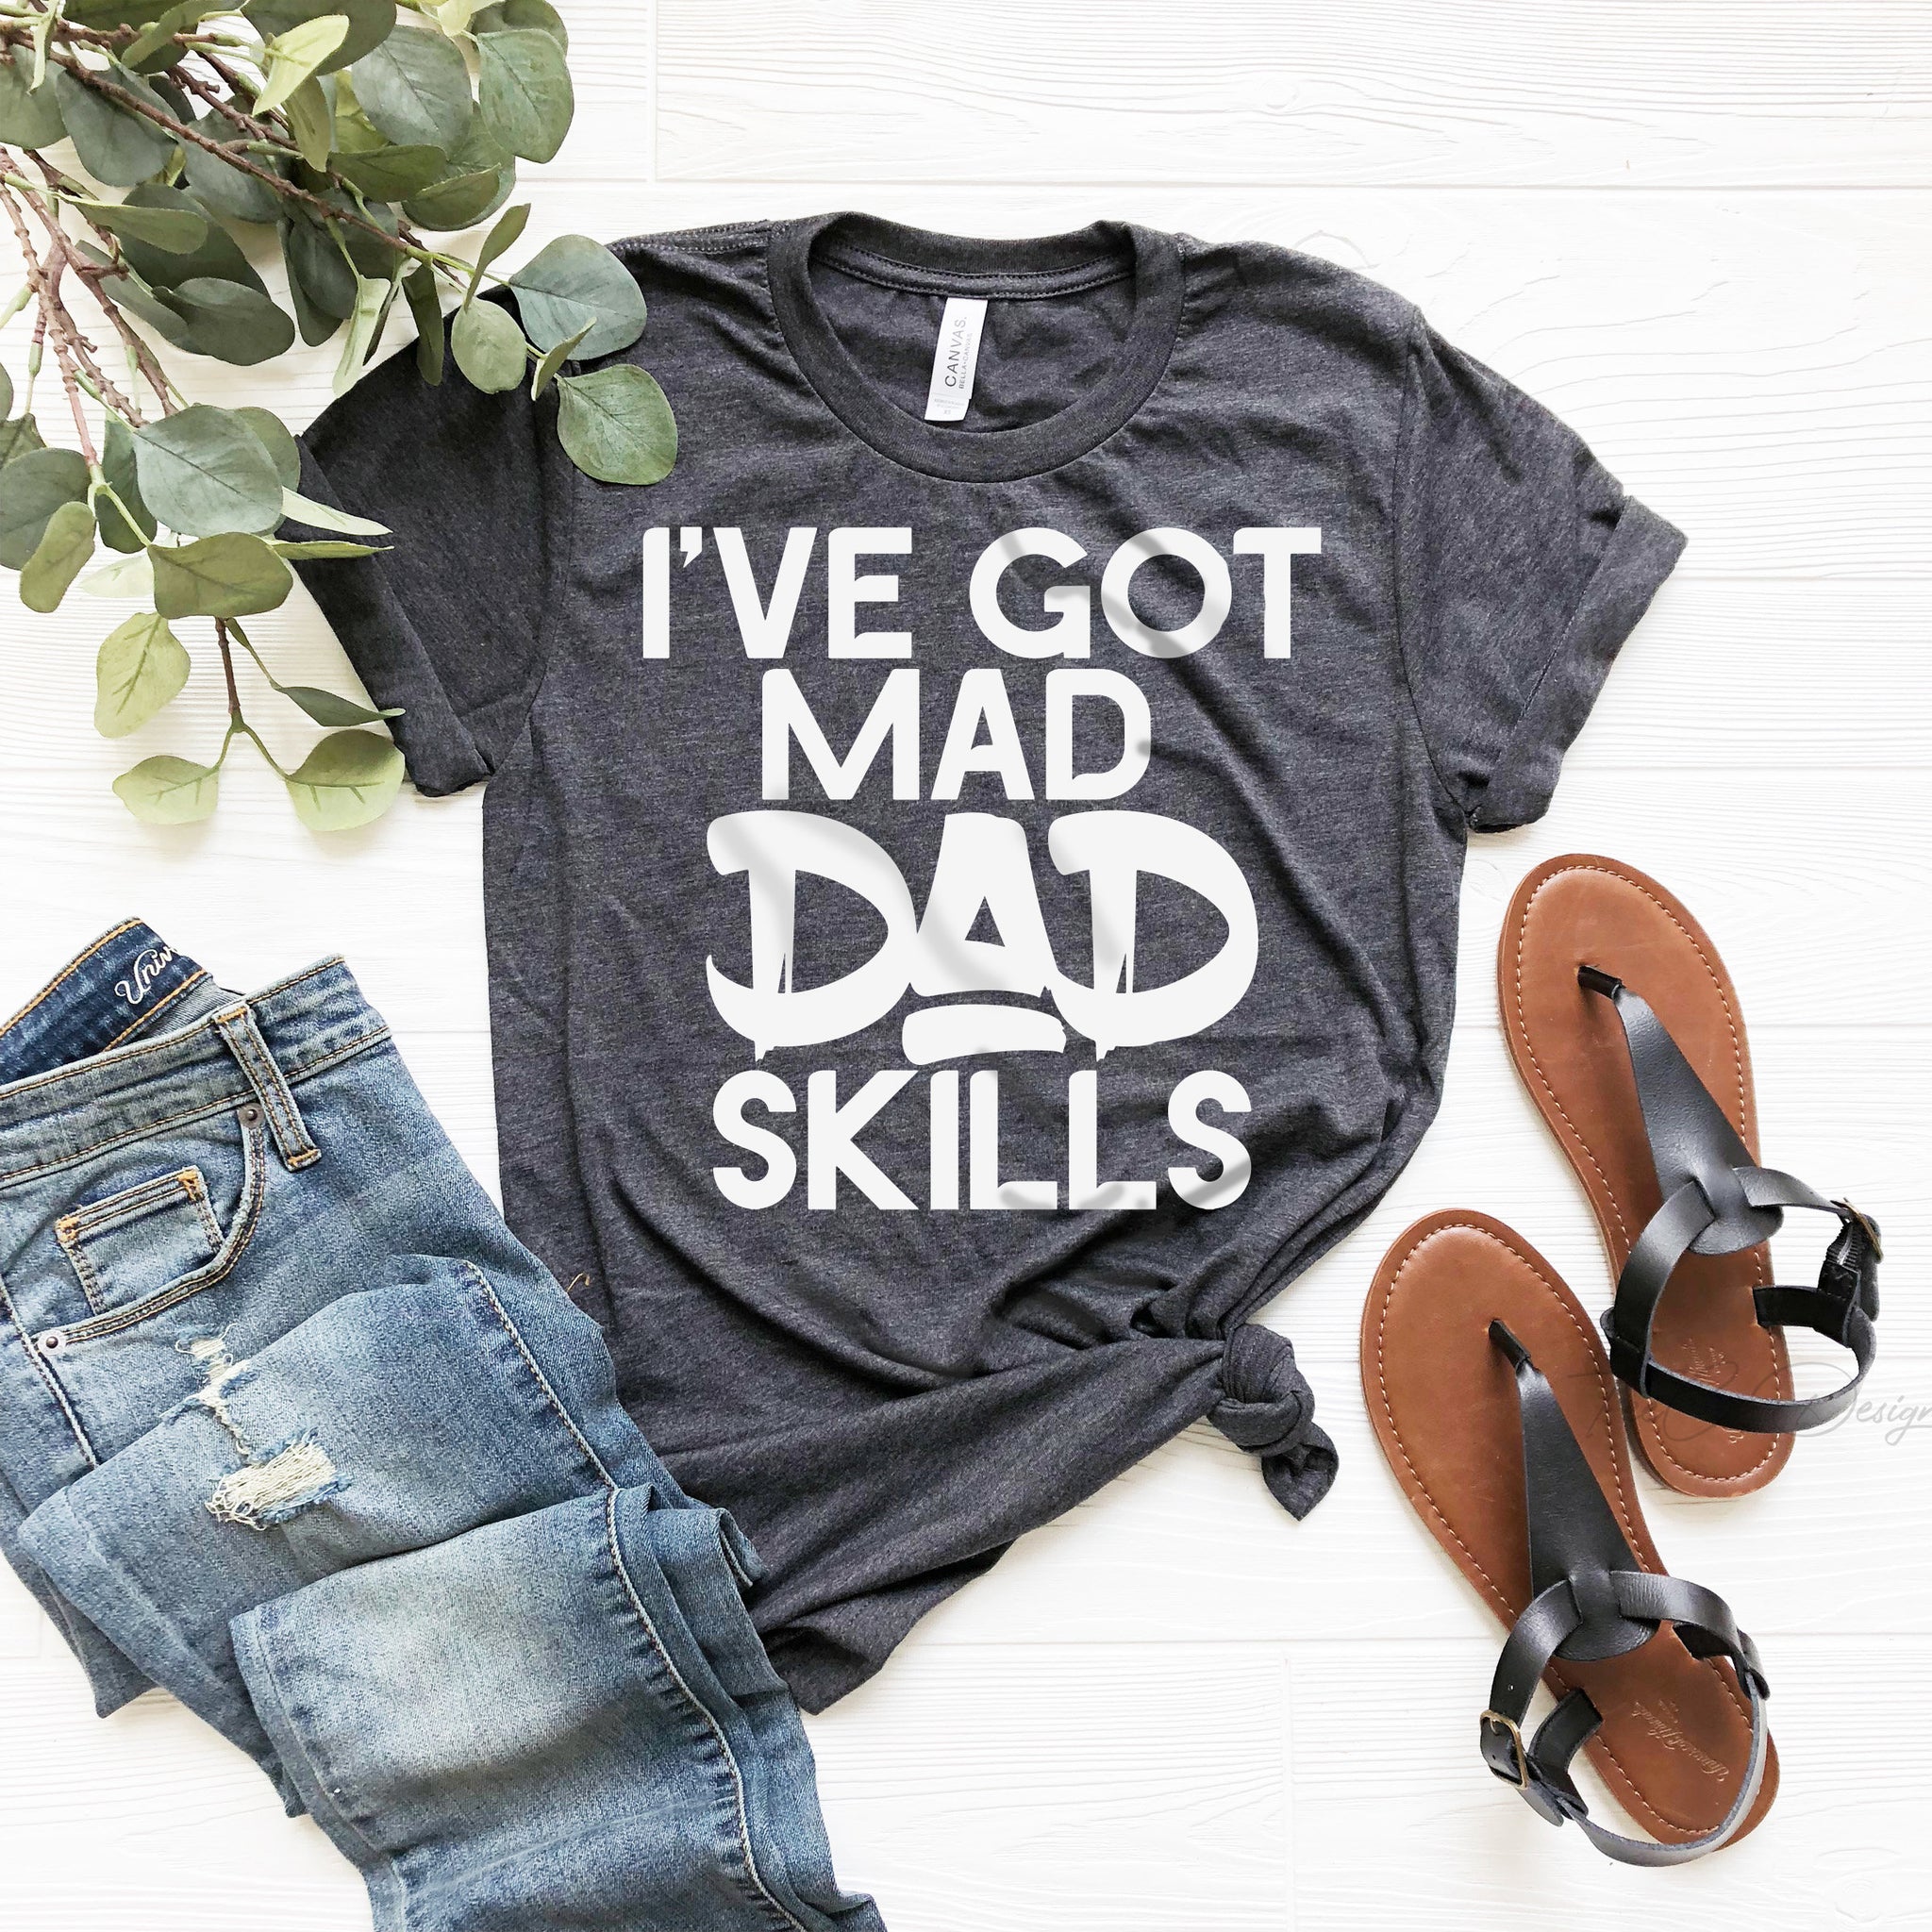 Mad Dad Skills, Funny Dad Tshirts for Fathers Day, Dad gift shirts, Dad shirts from daughter, Funny Shirts for dad men husband,Dad Birthday, - Fastdeliverytees.com